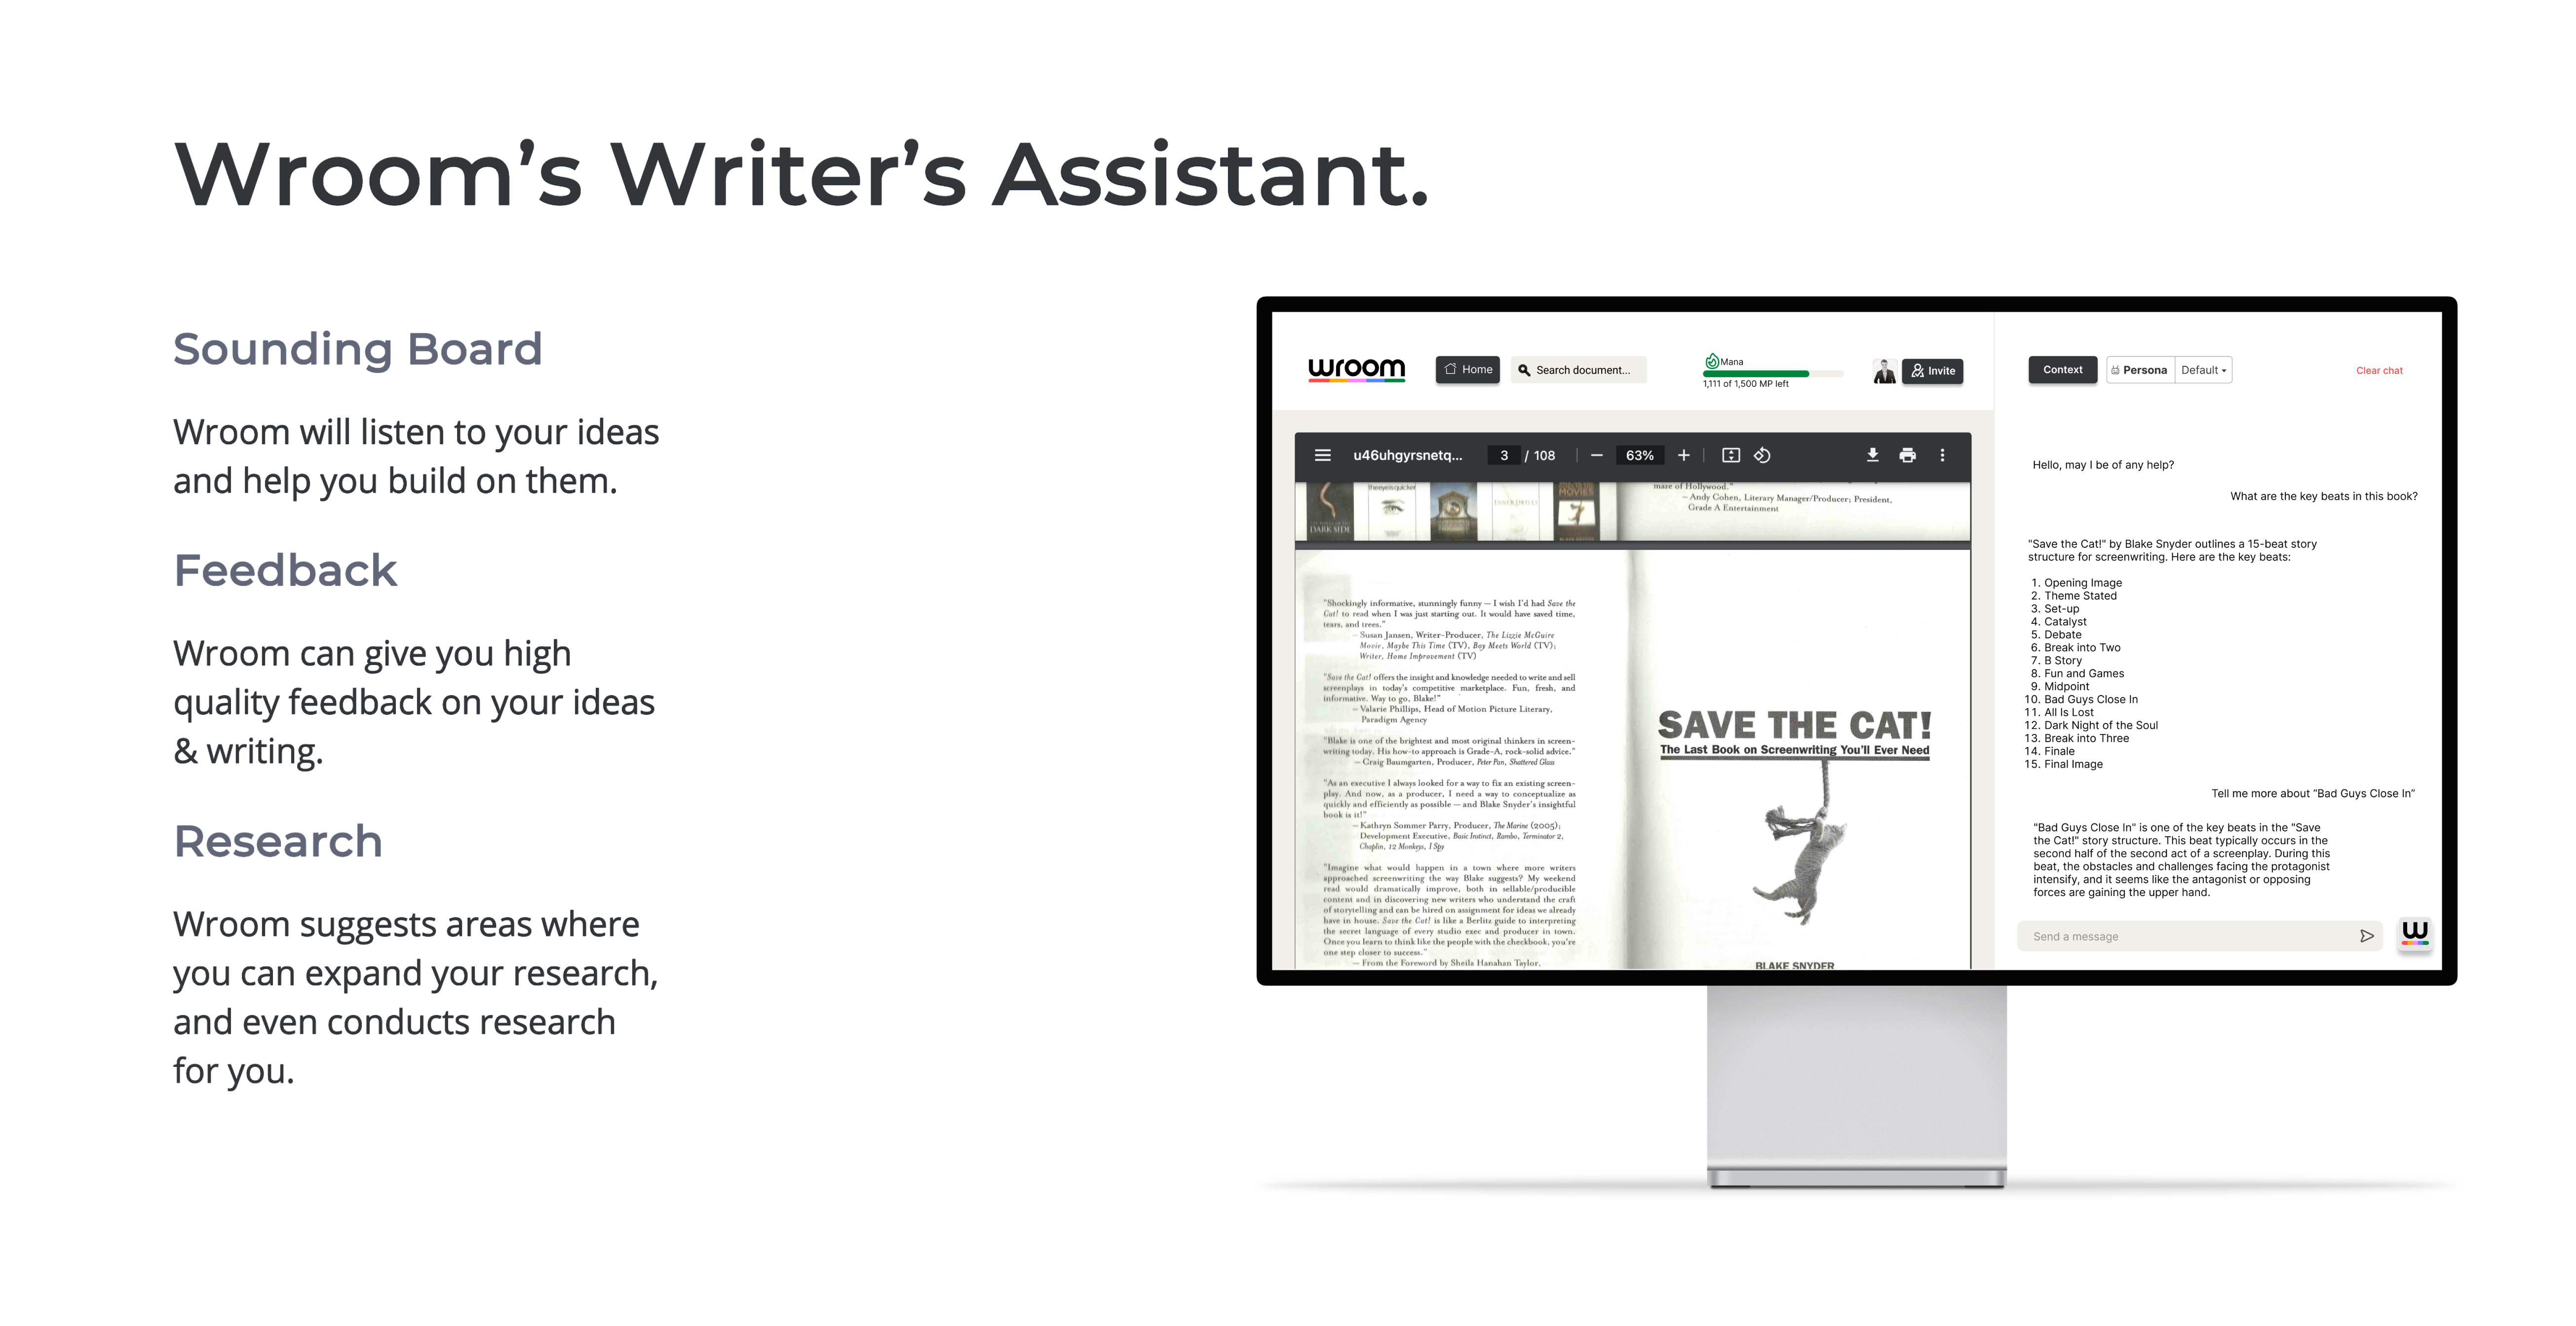 Wroom’s Writer’s Assistant.

Wrooms agenst act as a 

Sounding Board
Wroom will listen to your ideas and help you build on them.

they can give Feedback
Wroom can give you high quality feedback on your ideas & writing. 

they can also perform Research
Wroom suggests areas where you can expand your research, and even conducts research for you.